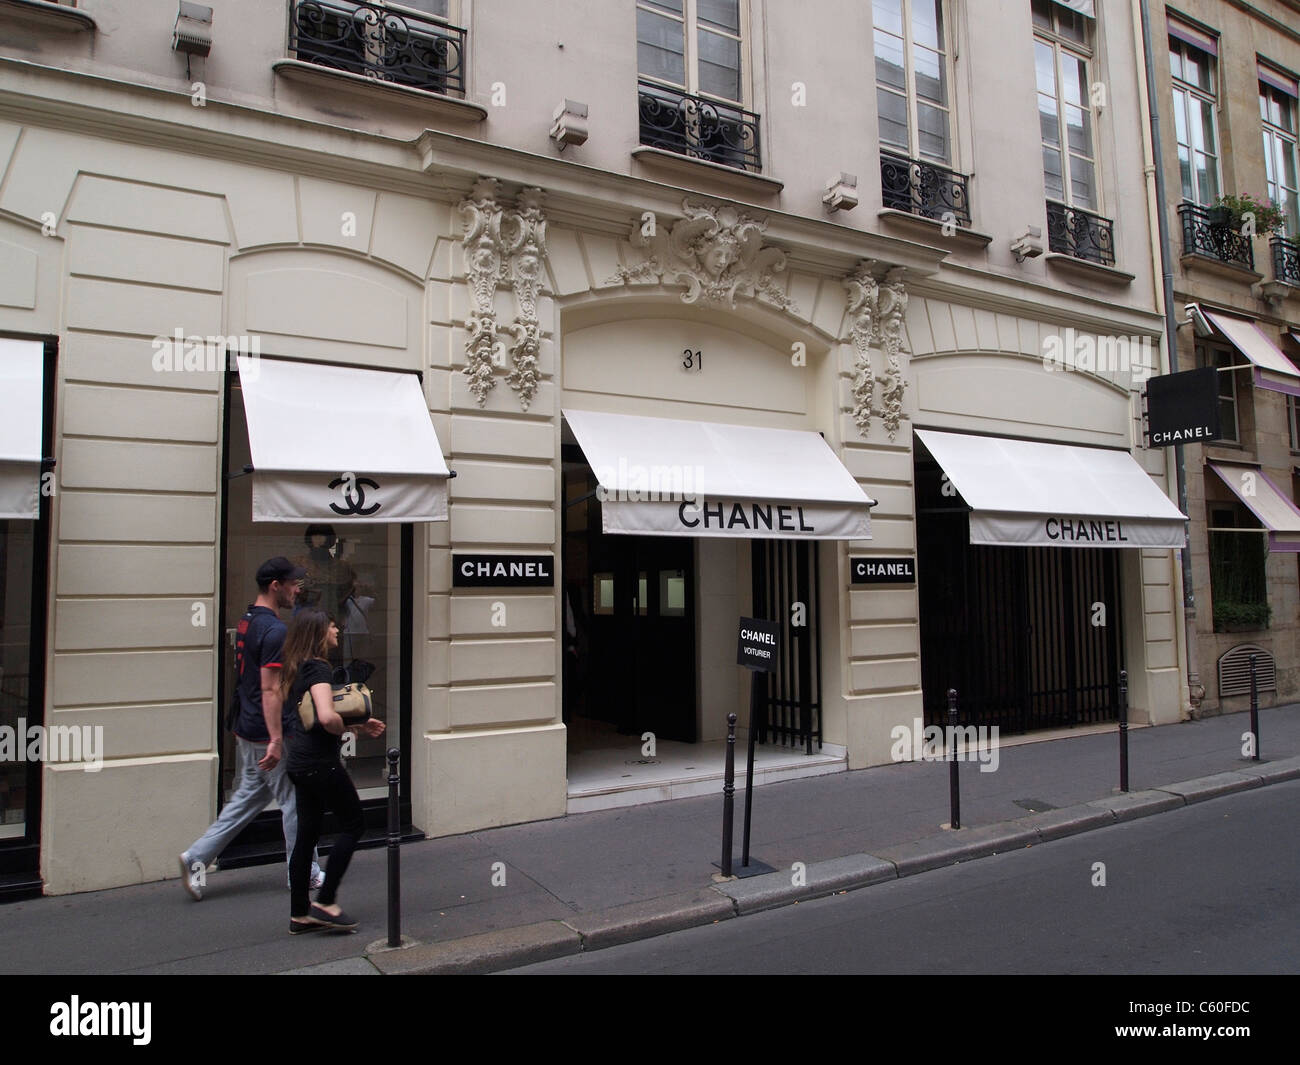 Udøve sport batteri Tilbageholdenhed The famous Chanel shop Rue Cambon 31 in Paris, France. This fashion shop  was founded by Coco Chanel in 1915 Stock Photo - Alamy